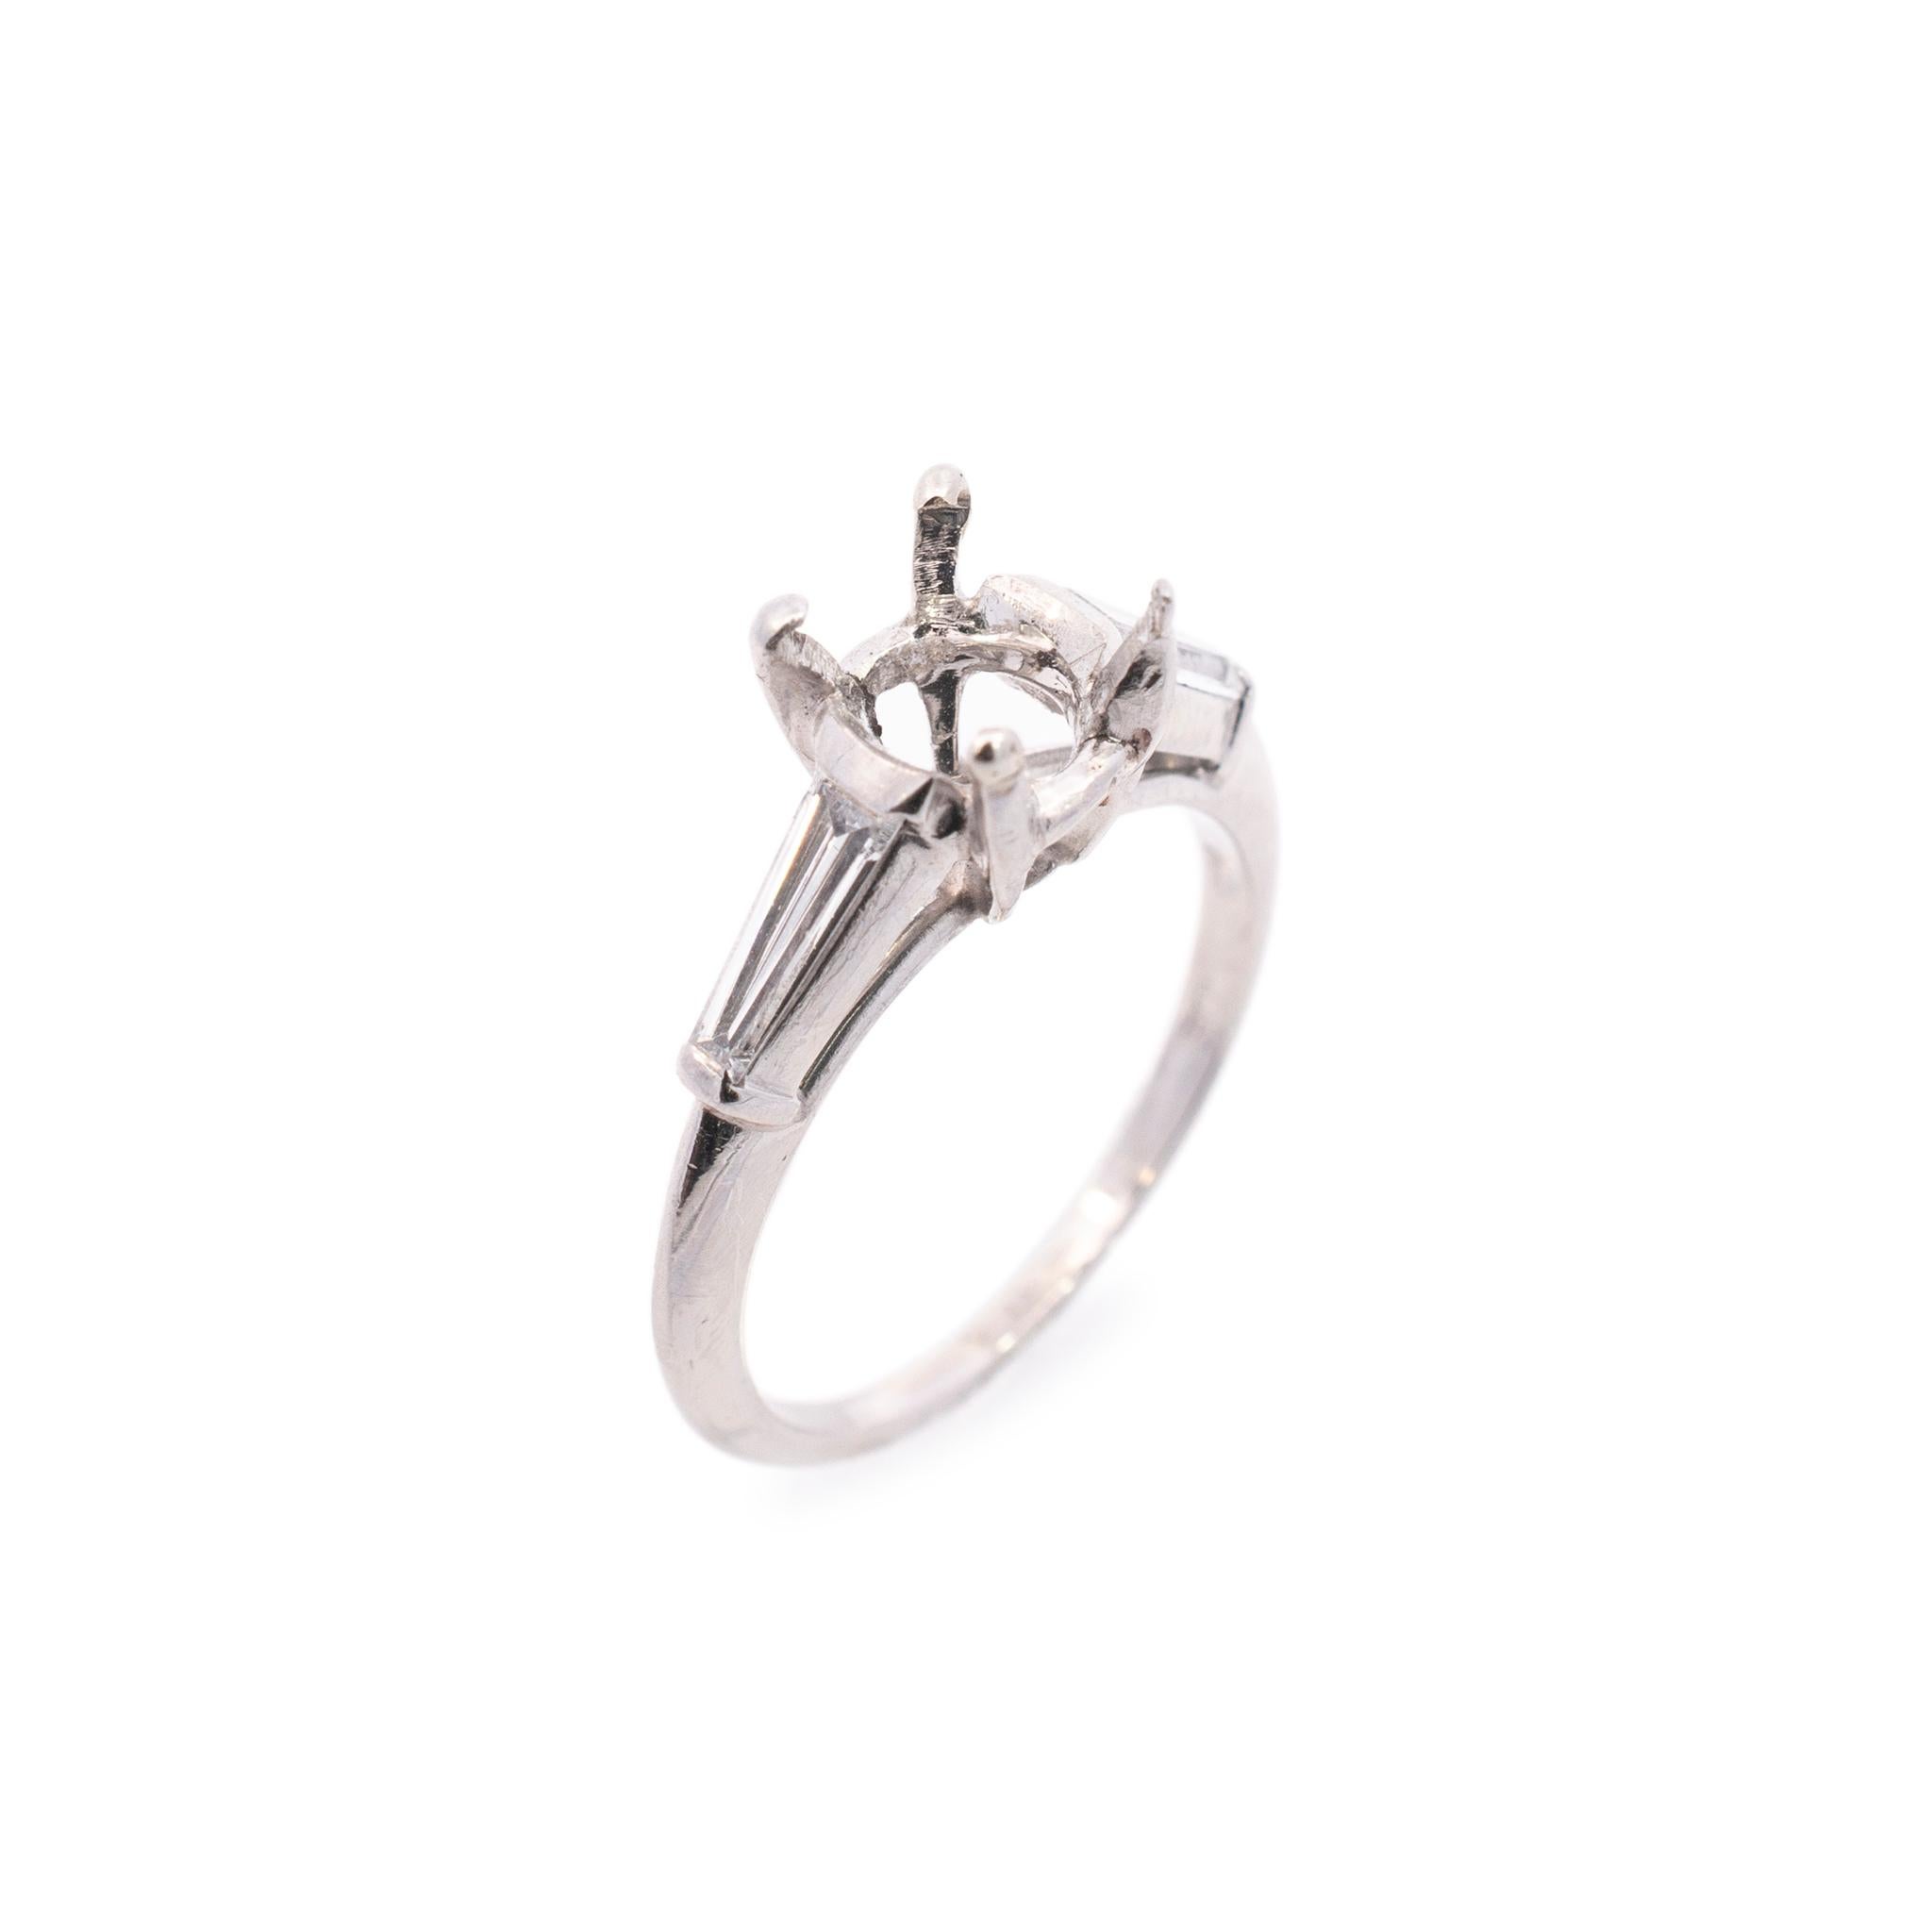 One lady's custom made polished platinum, diamond engagement, semi-mount ring with a half round shank. The ring is a size 5.5. The ring weighs a total of 4.00 grams. Engraved with 